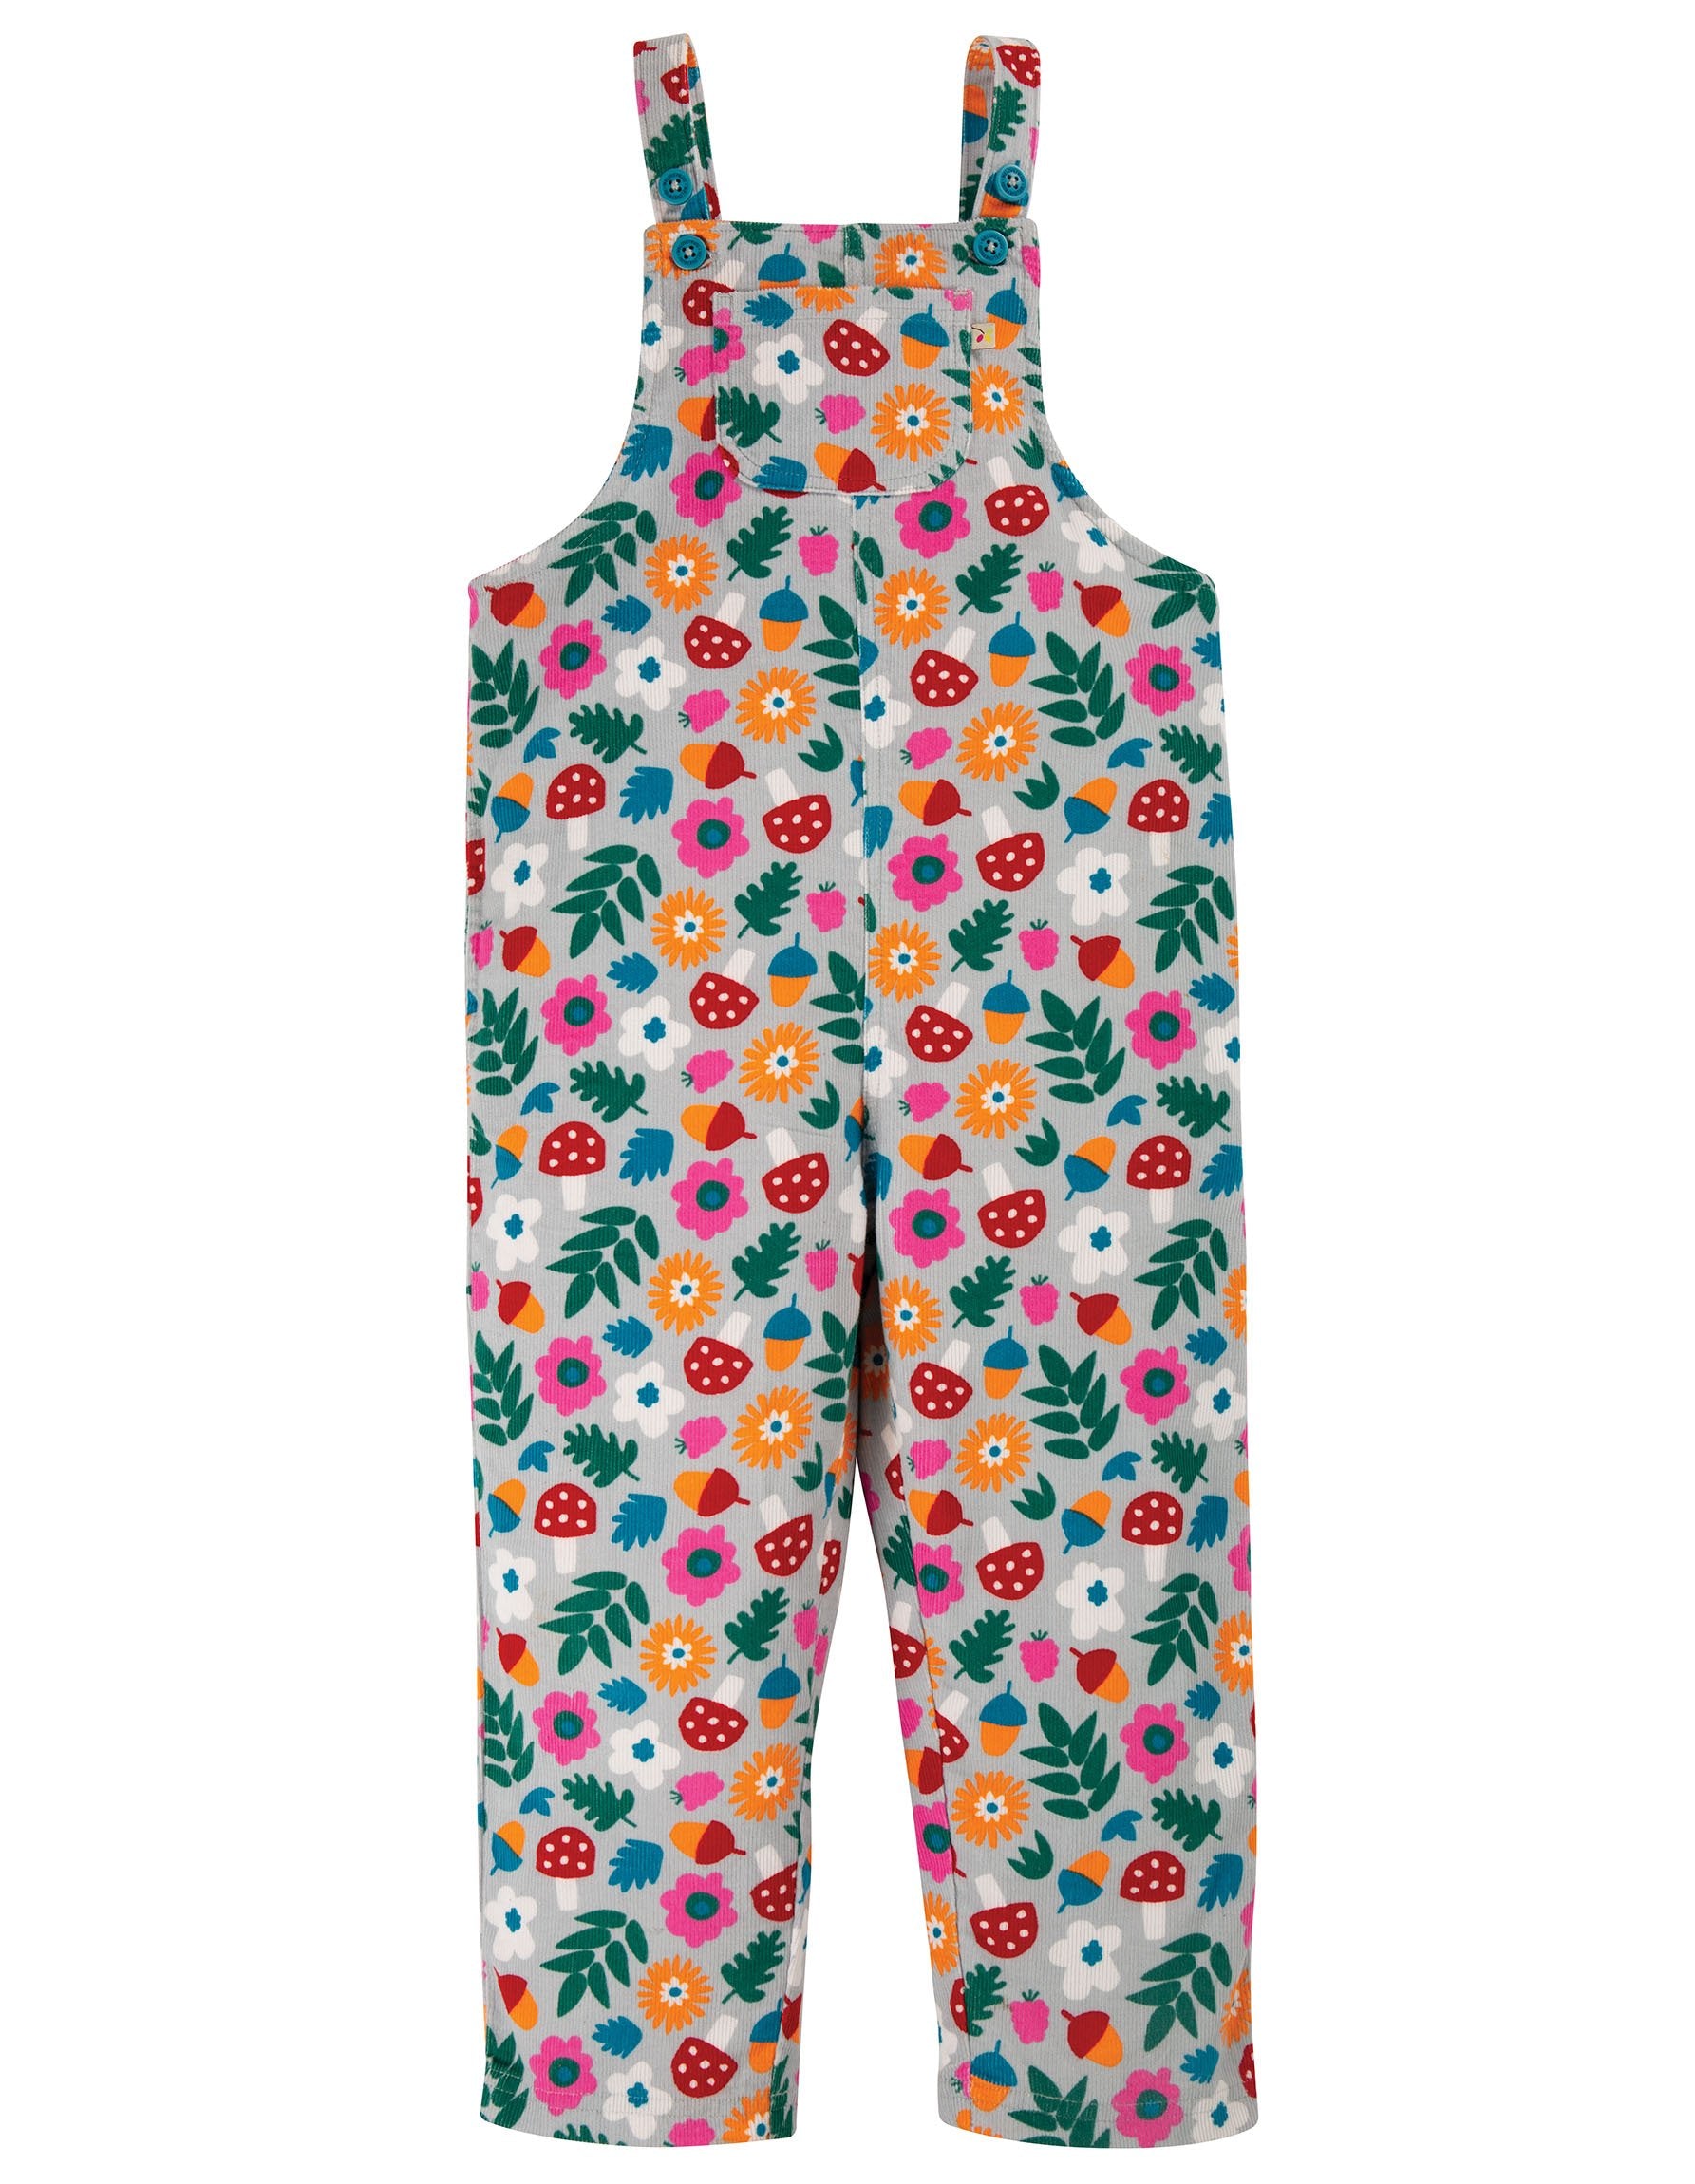 New Release Frugi Neptune Cord Dungaree Tin Roof Lost Words - The Thrifty Stork